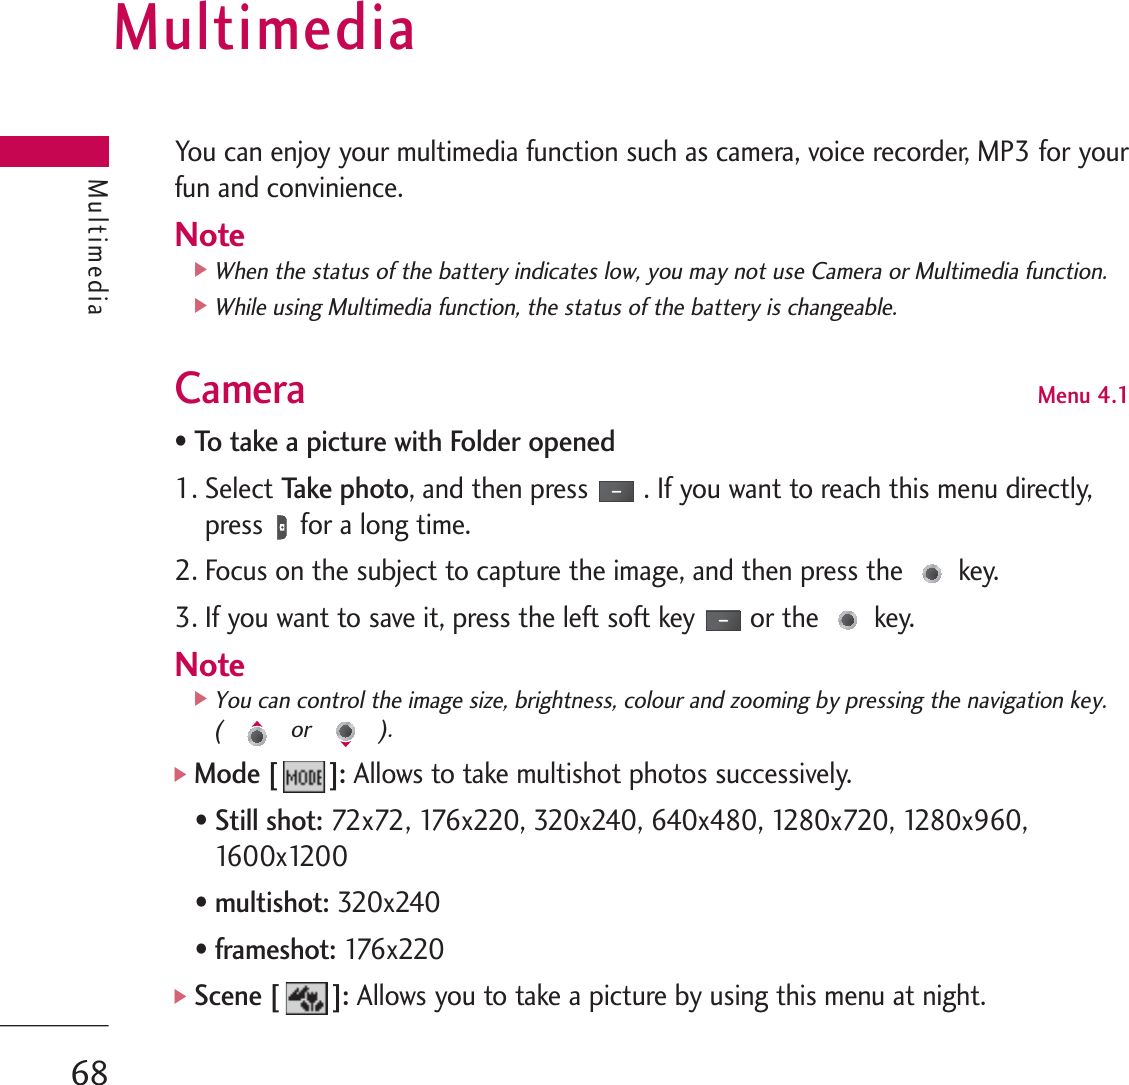 MultimediaYou can enjoy your multimedia function such as camera, voice recorder, MP3 for yourfun and convinience.Note]When the status of the battery indicates low, you may not use Camera or Multimedia function.]While using Multimedia function, the status of the battery is changeable.Camera Menu 4.1• To take a picture with Folder opened1. Select Ta ke  p h o to, and then press . If you want to reach this menu directly,press for a long time.2. Focus on the subject to capture the image, and then press the key.3. If you want to save it, press the left soft key or the key.Note]You can control the image size, brightness, colour and zooming by pressing the navigation key. ( or ).]Mode [ ]: Allows to take multishot photos successively. • Still shot:72x72, 176x220, 320x240, 640x480, 1280x720, 1280x960,1600x1200  • multishot: 320x240• frameshot: 176x220 ]Scene [ ]:Allows you to take a picture by using this menu at night.Multimedia68